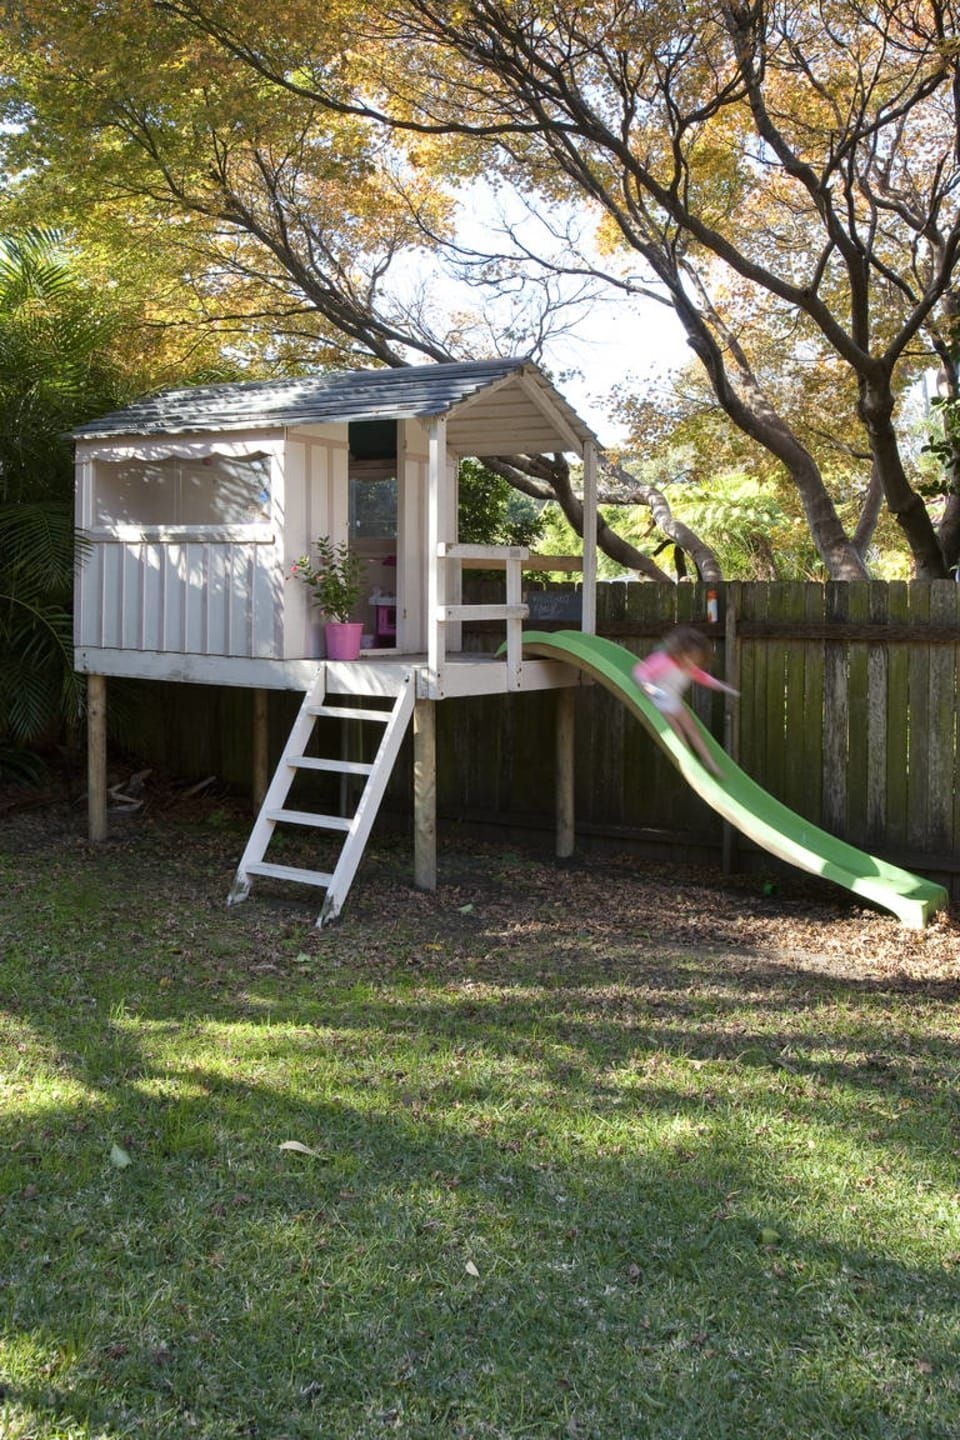 Playhouse and slide